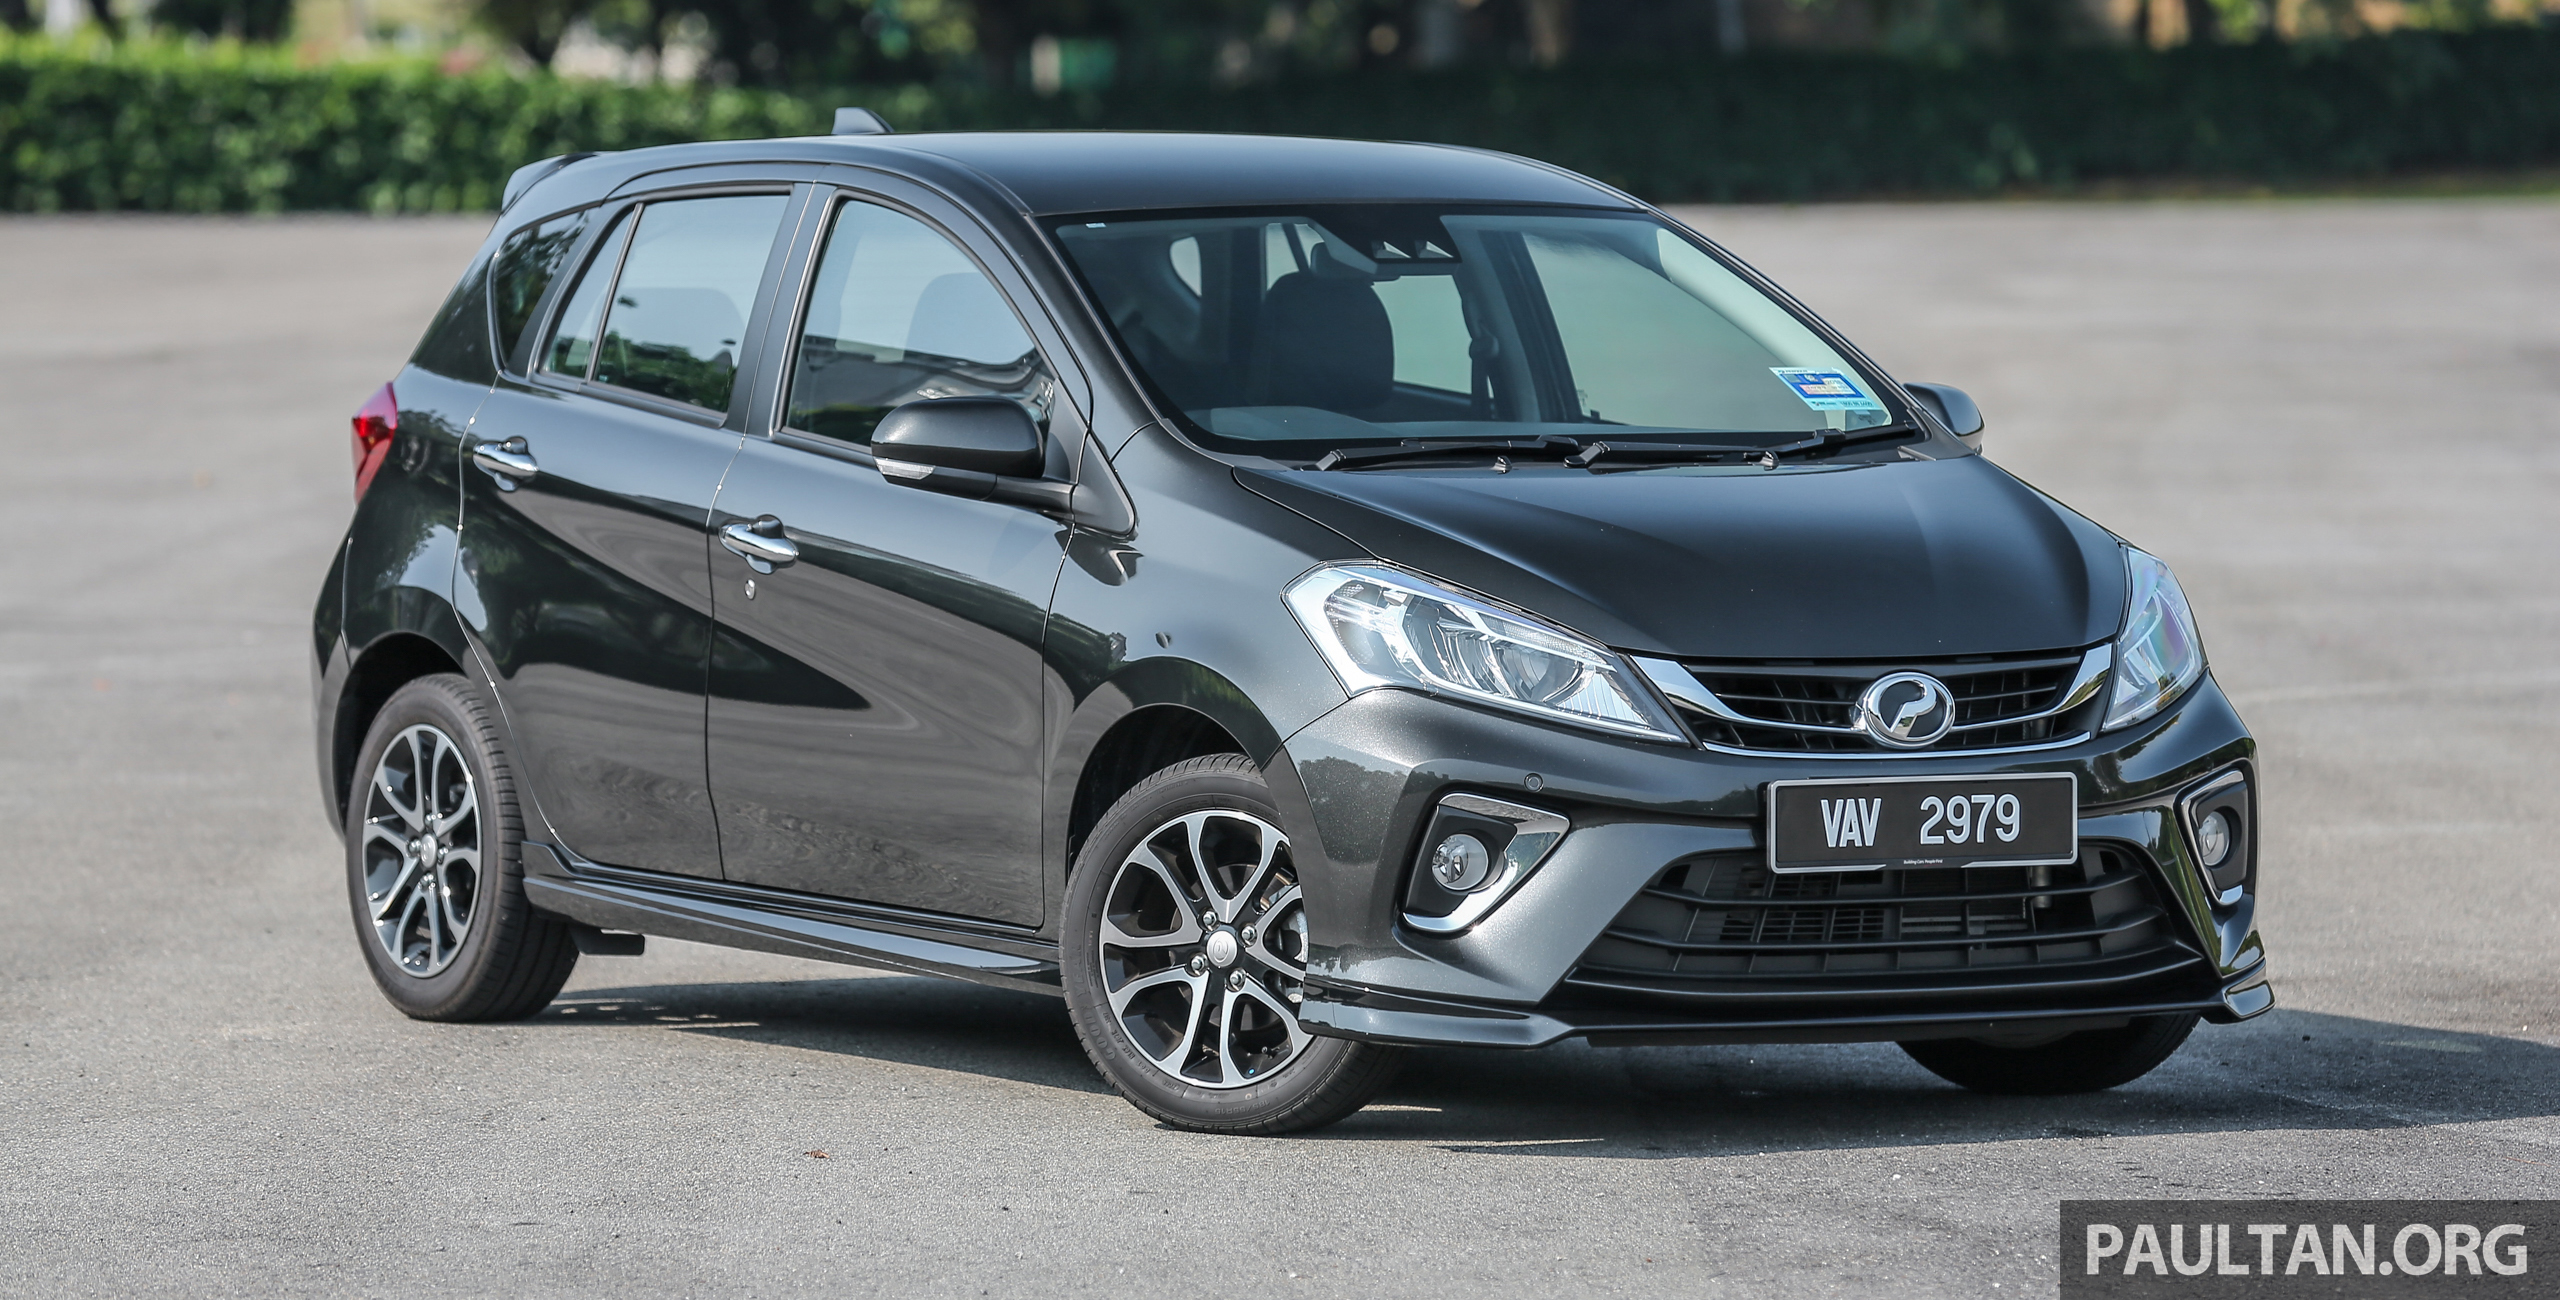 Gst Zero Rated Perodua Prices Reduced Up To Rm3 5k Paultan Org